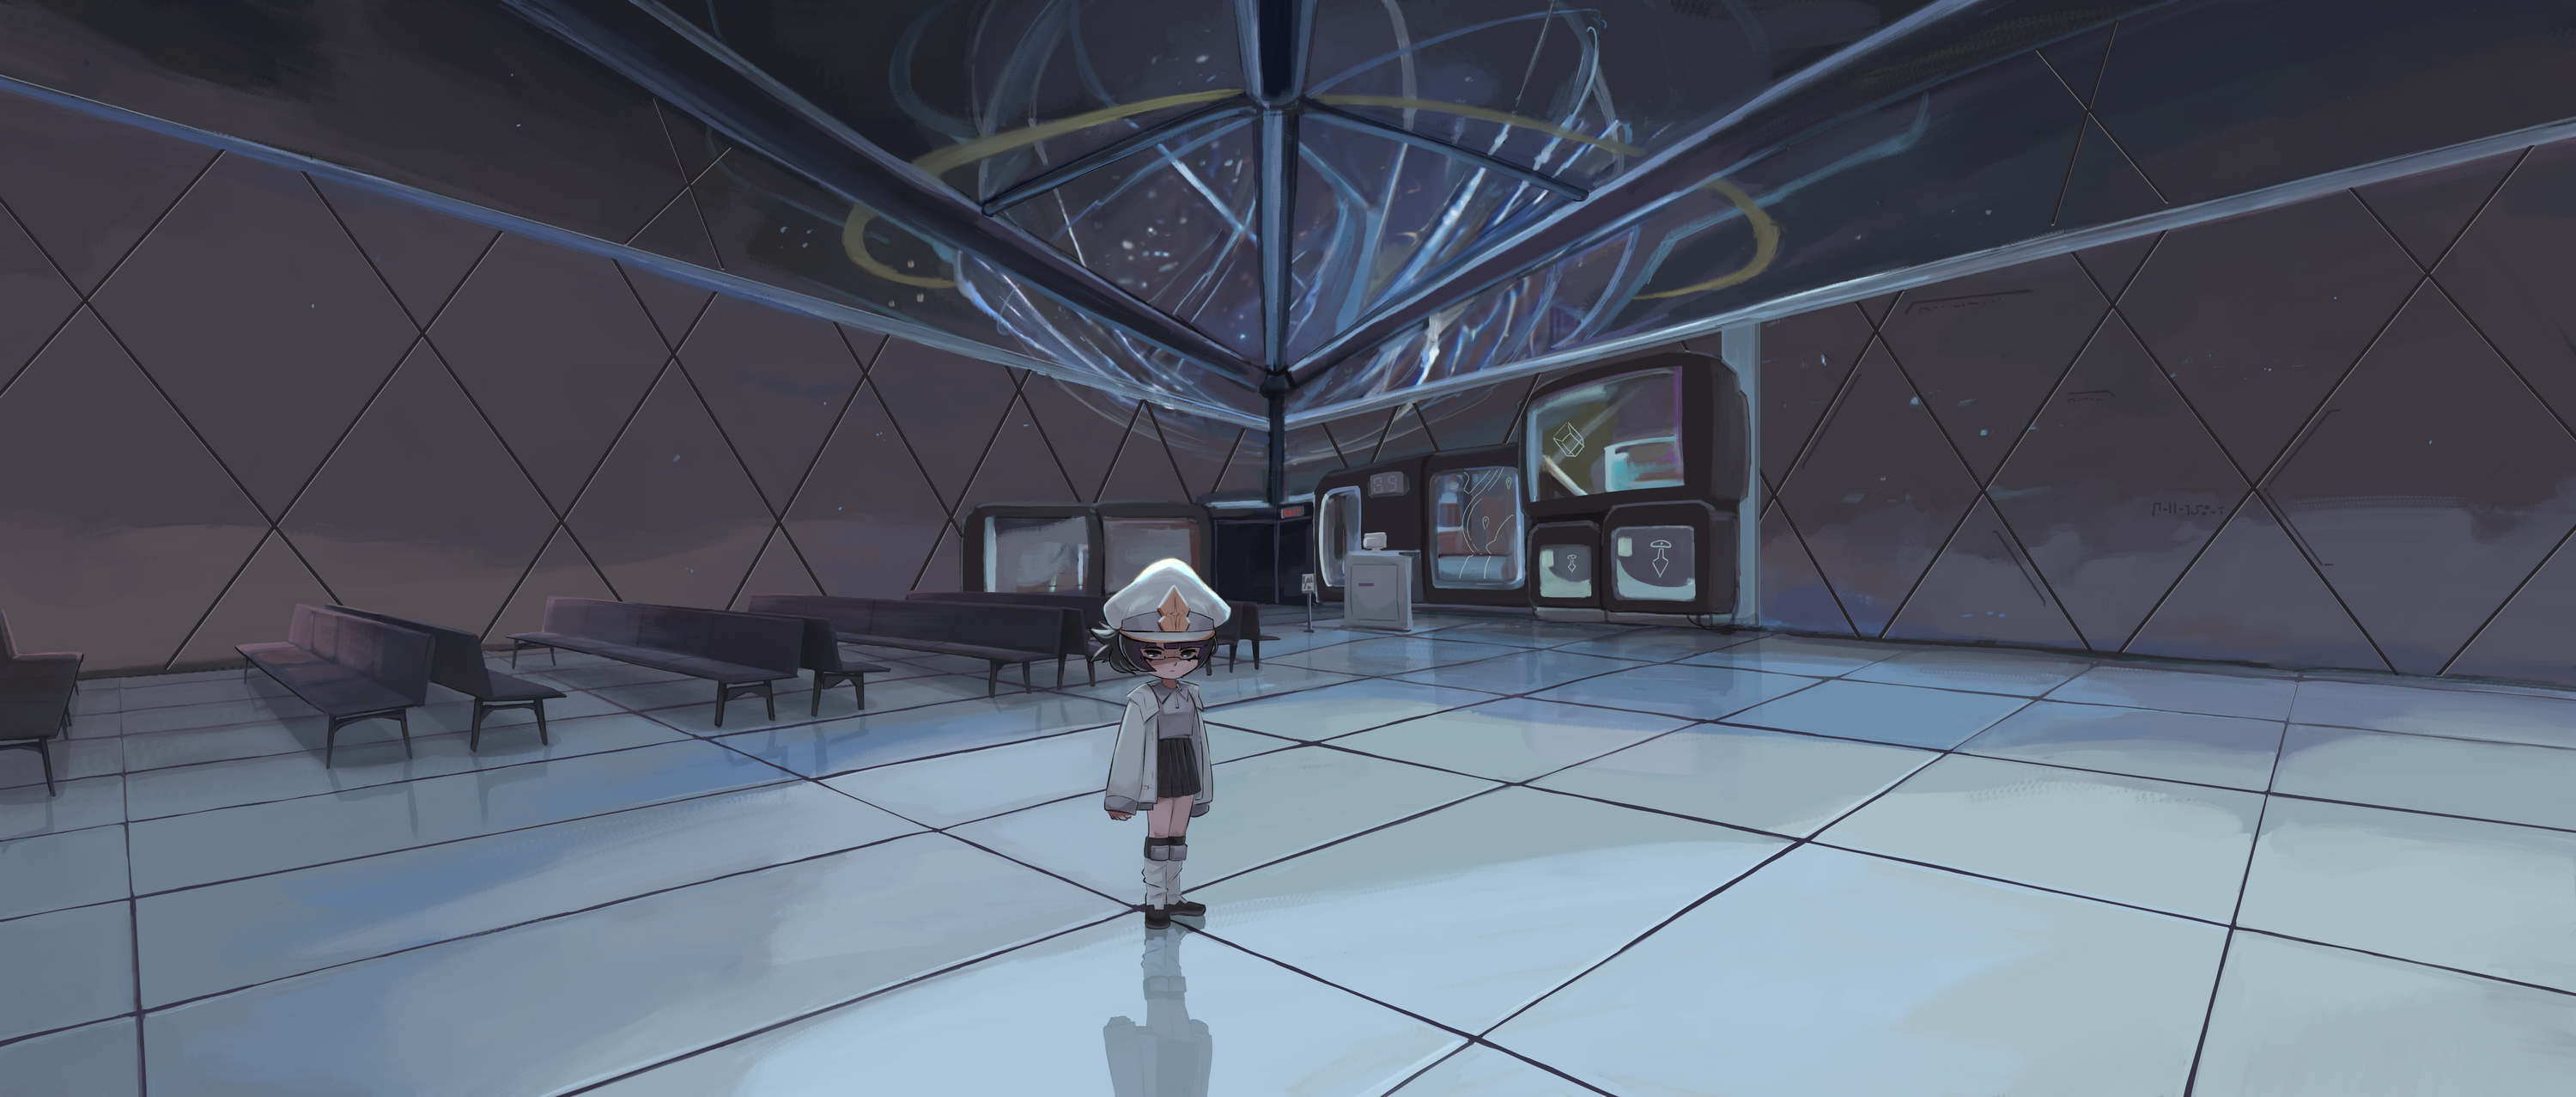 a girl in a captain uniform standing in an empty airport-esque building